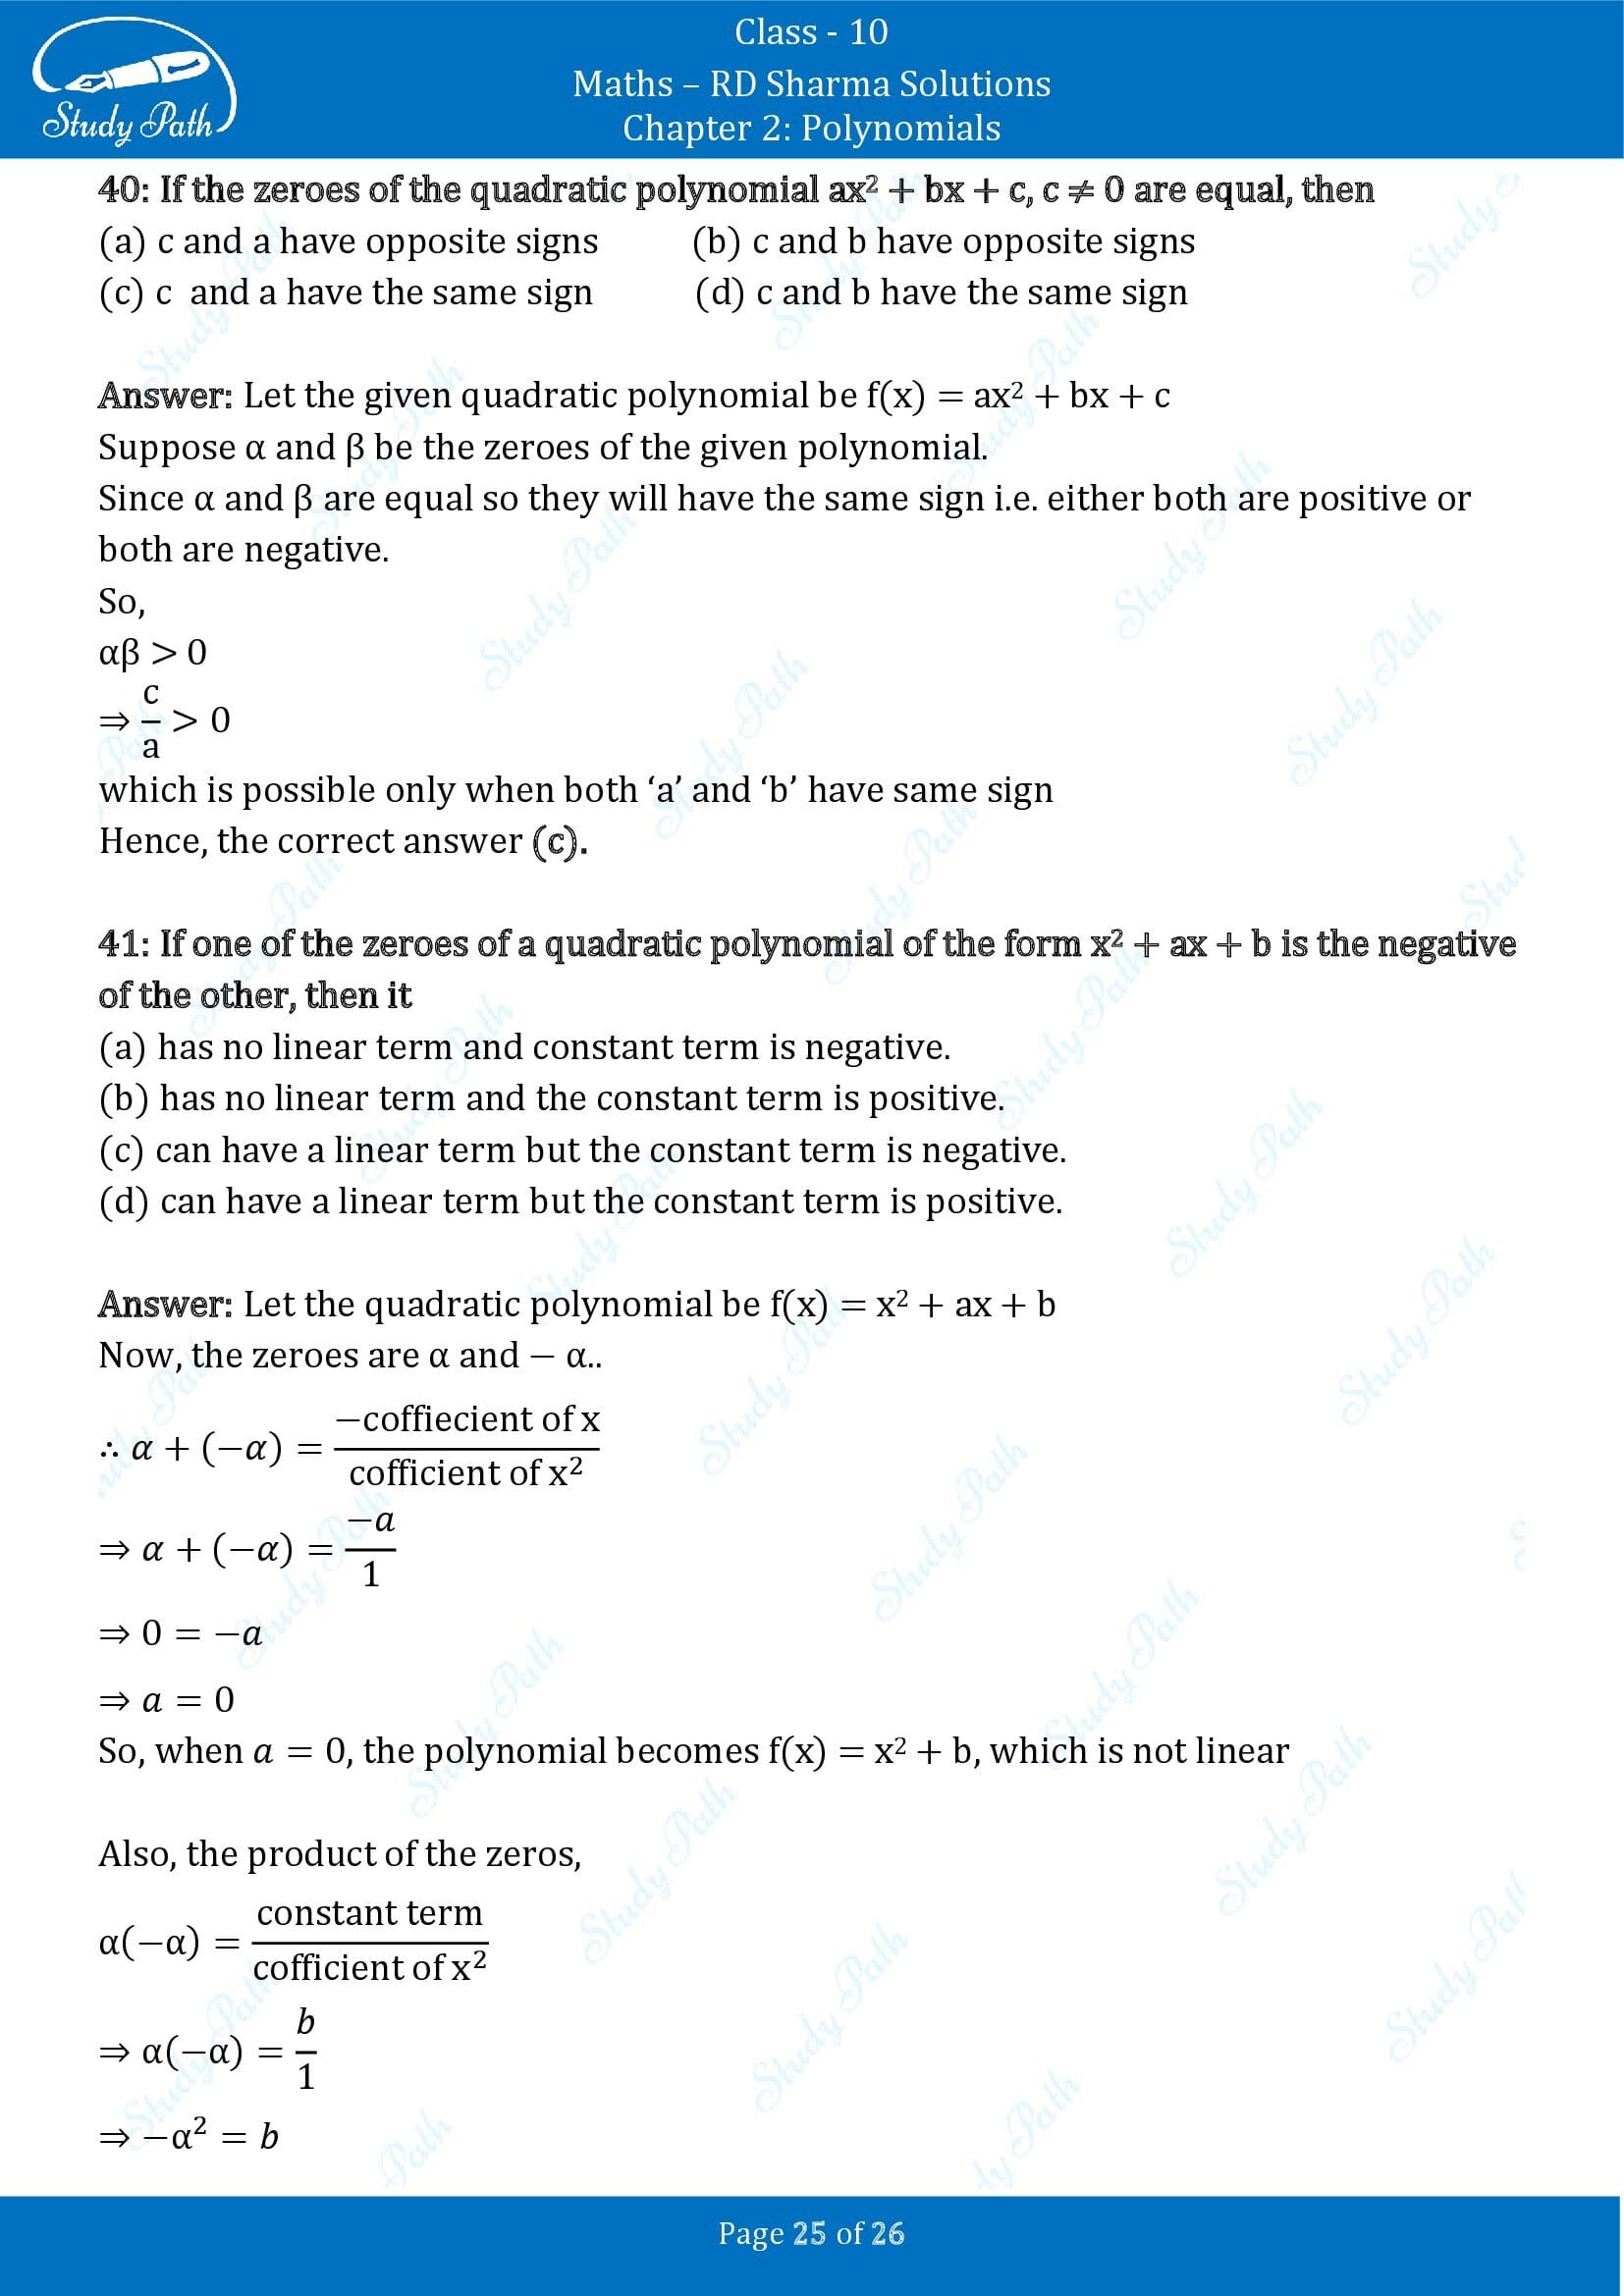 RD Sharma Solutions Class 10 Chapter 2 Polynomials Multiple Choice Questions MCQs 00025